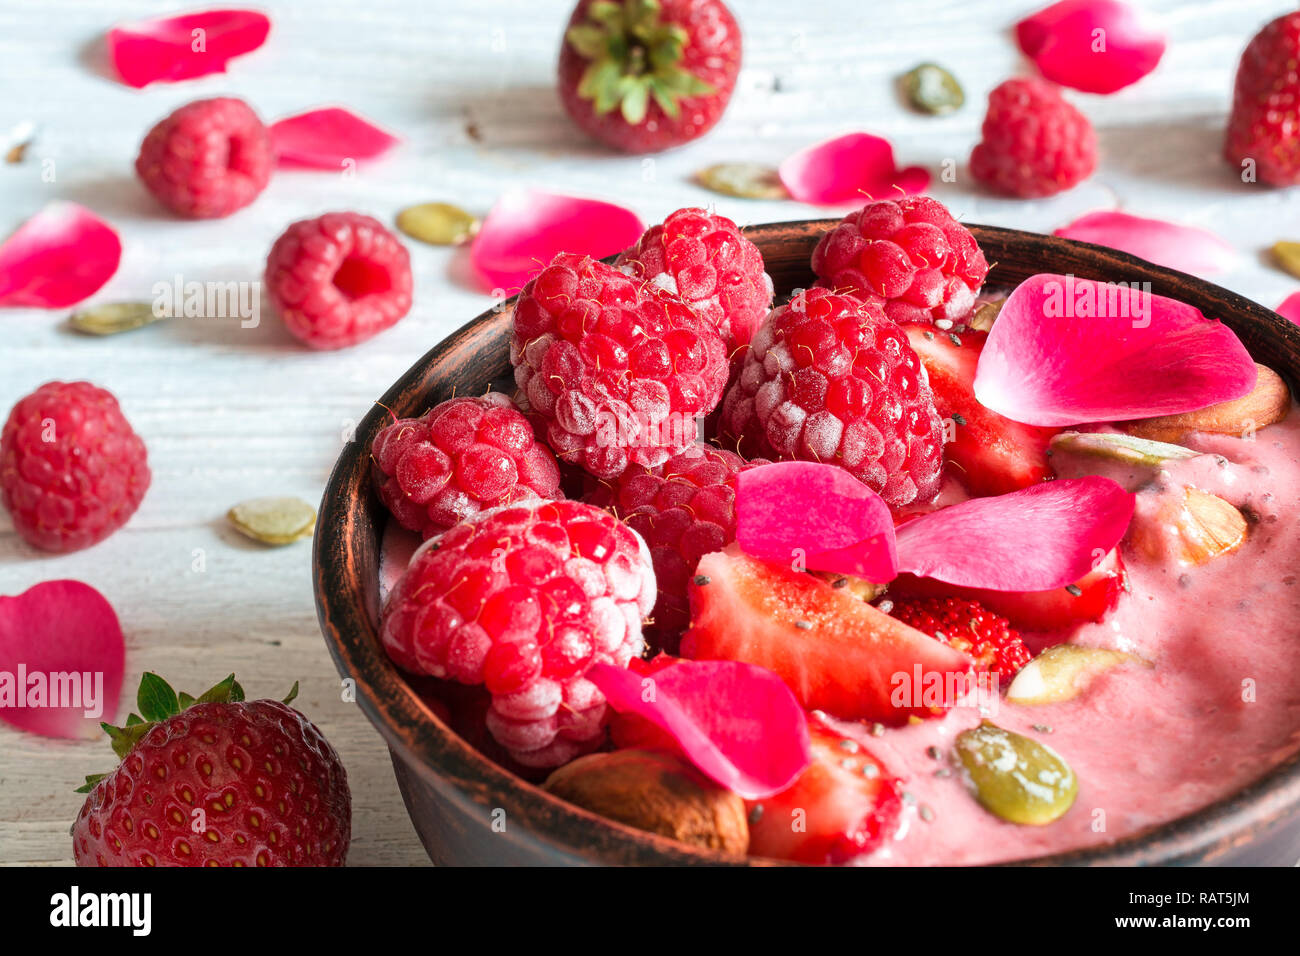 healthy breakfast. bowl of red berry smoothie with strawberry, raspberry, nuts and seeds decorated with rose flower petals. close up Stock Photo